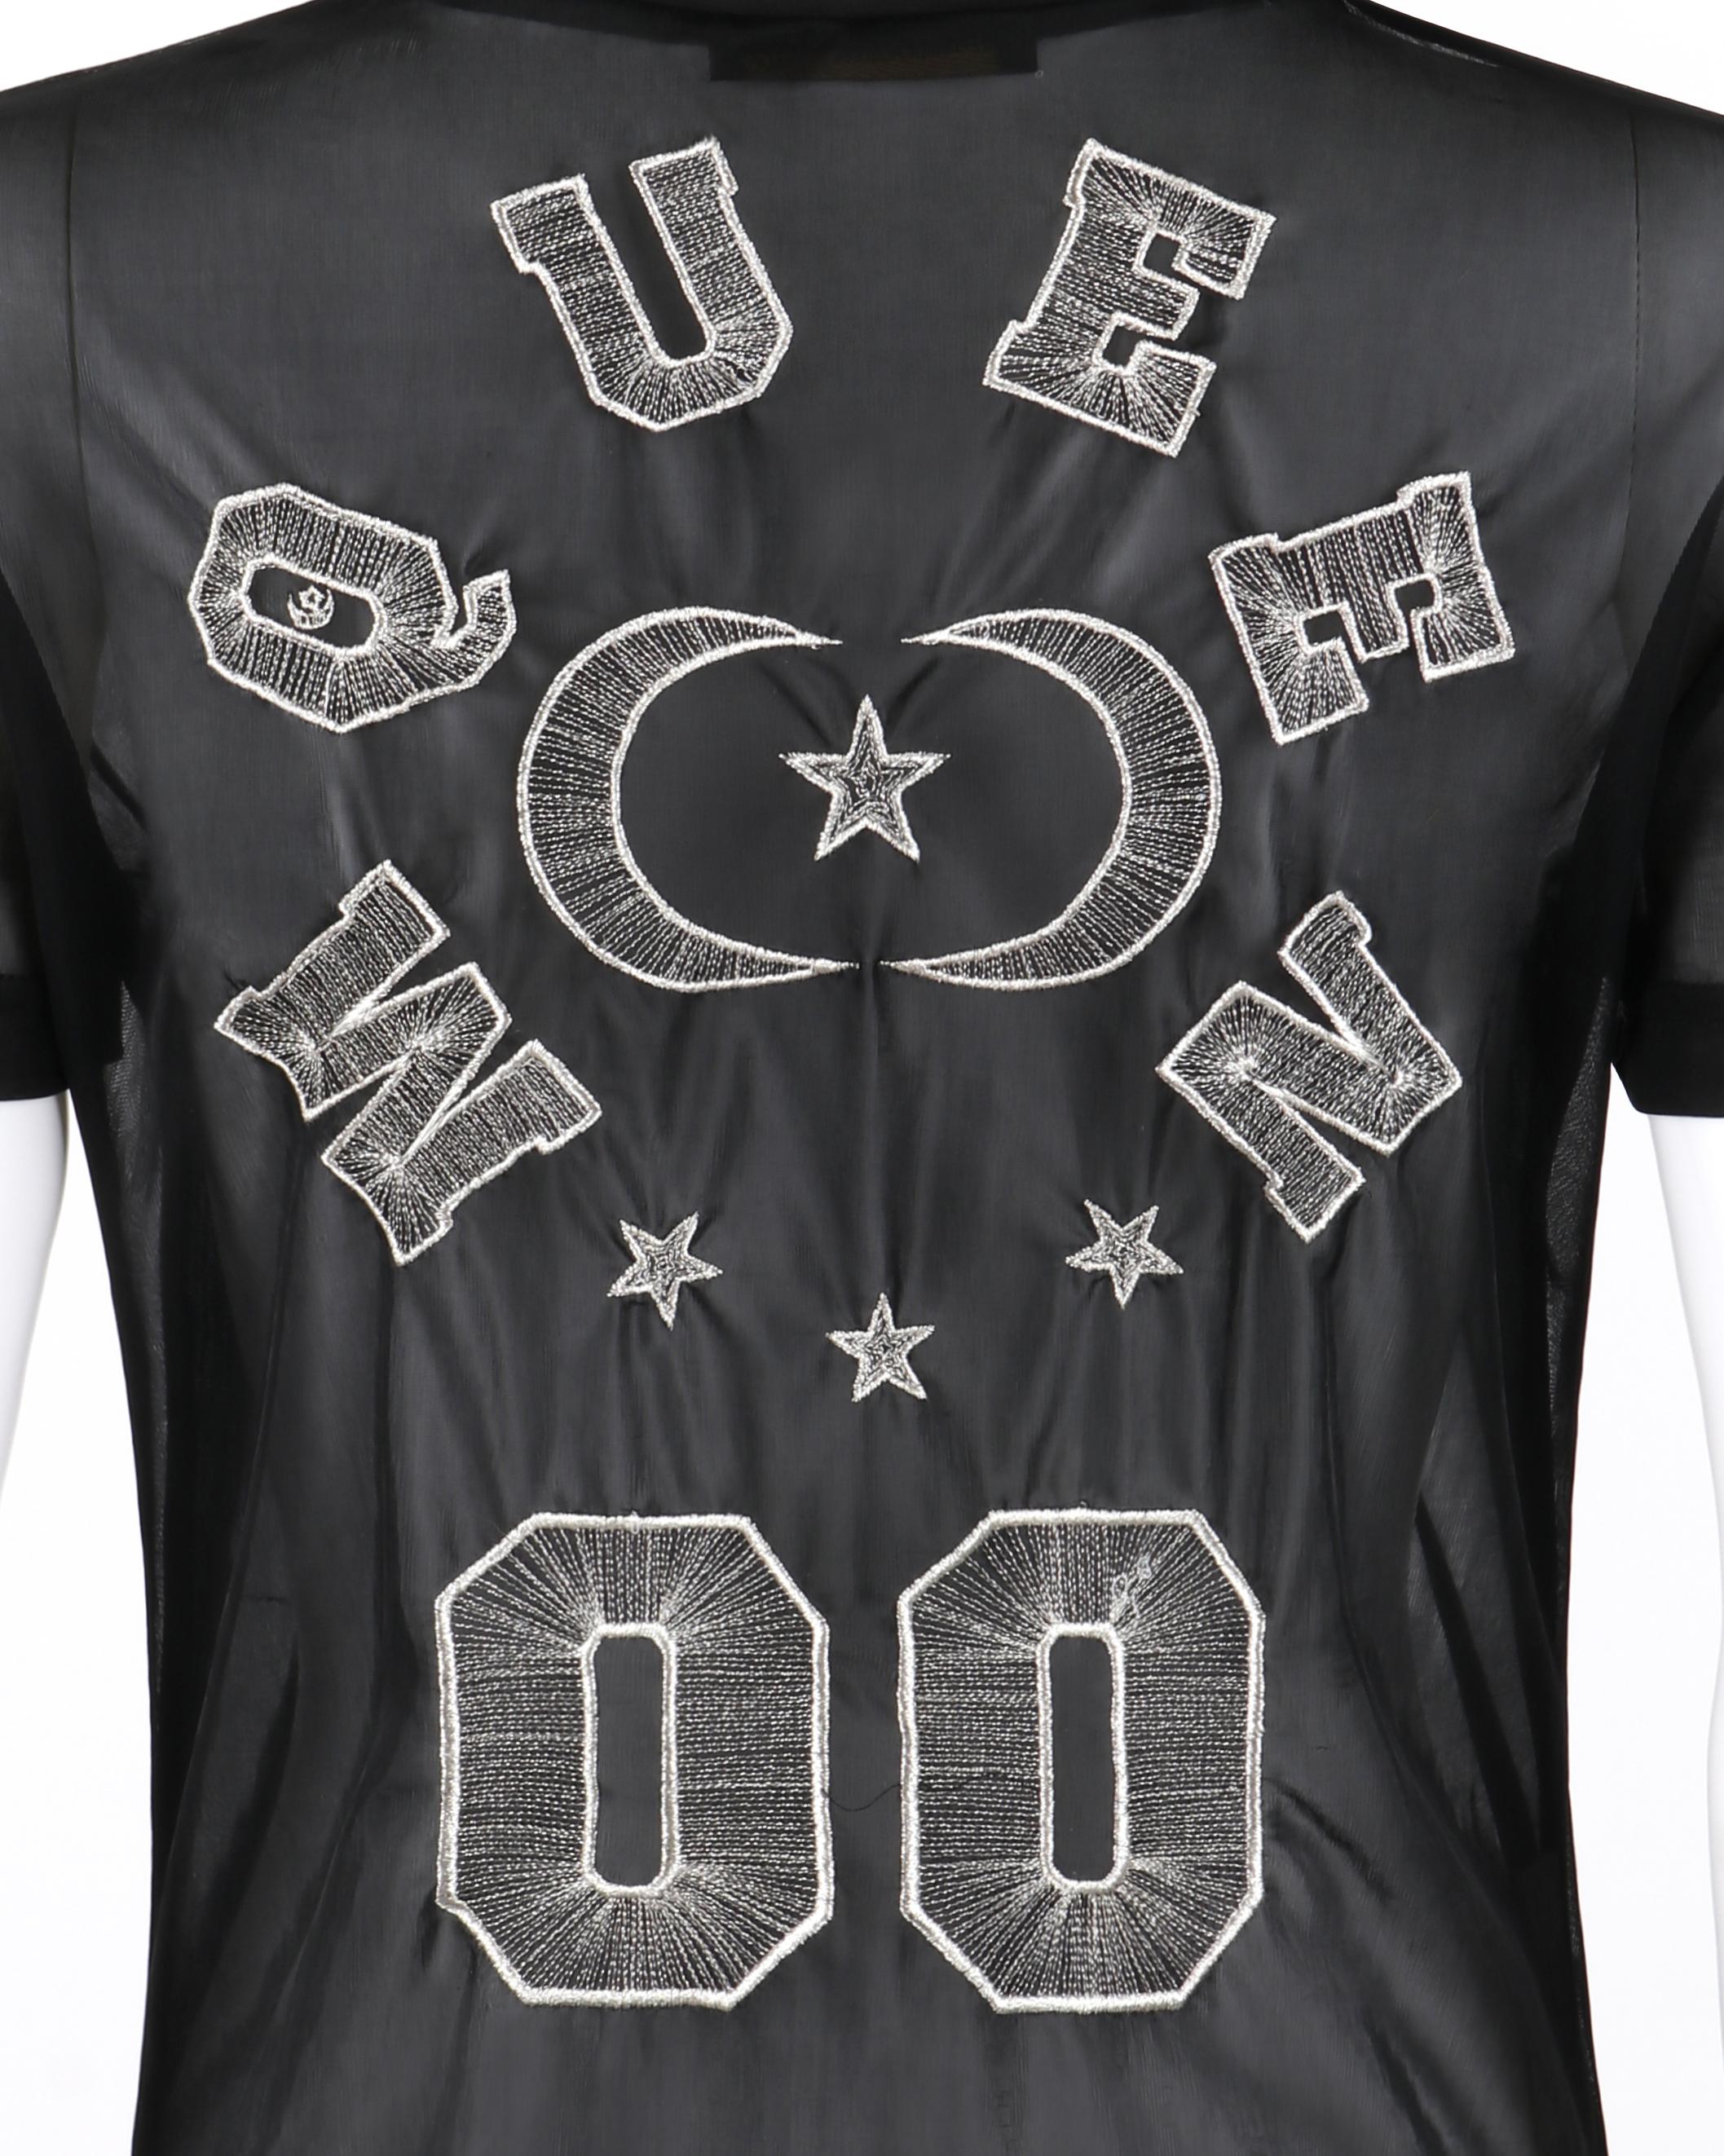 ALEXANDER McQUEEN S/S 2000 “Eye” Black Silver Metallic Athletic Jersey Patch Top For Sale 1